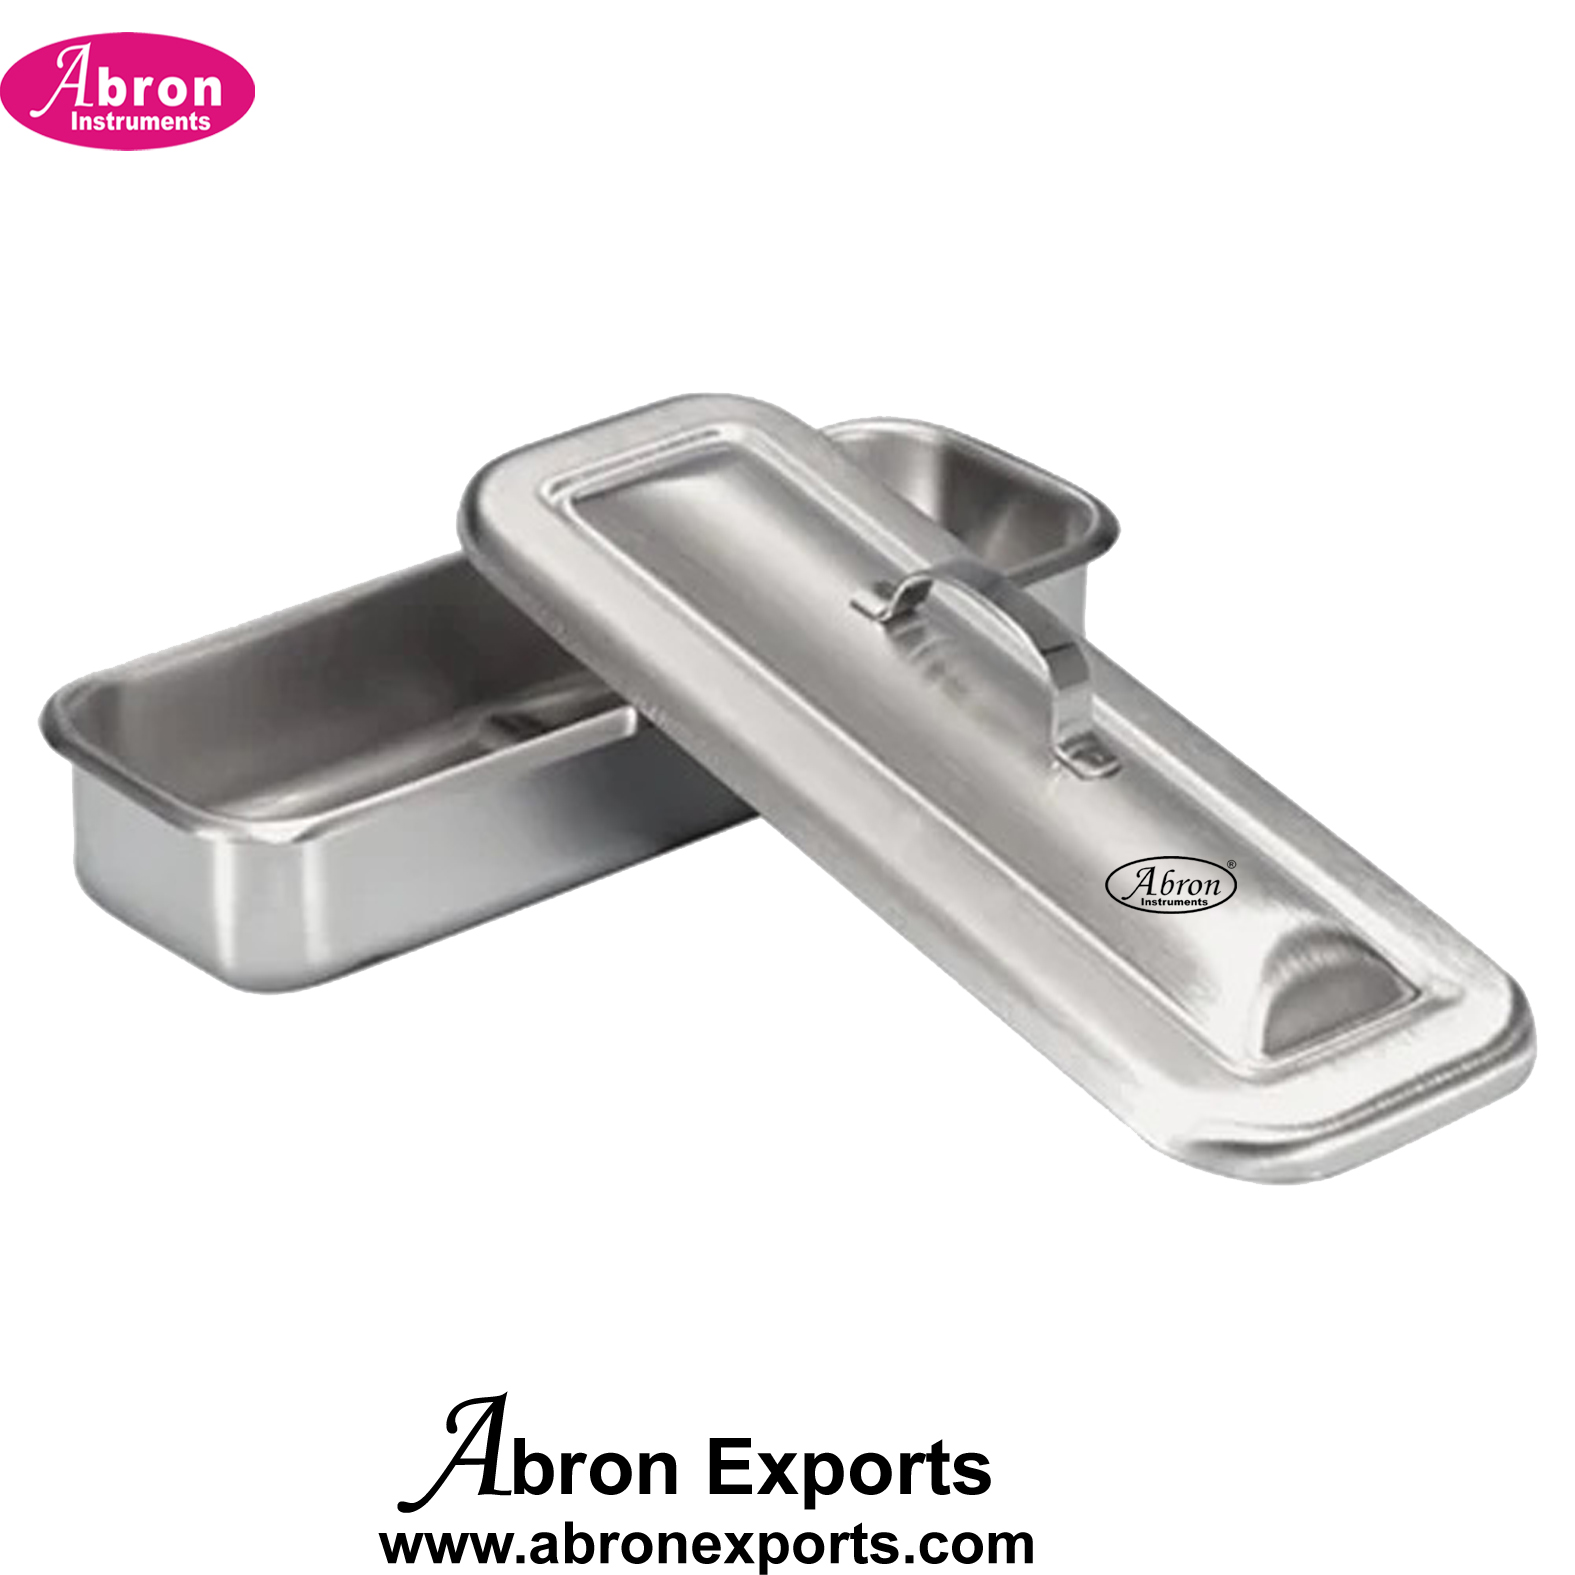 Hospital Surgical instruments Catherter Trays deep 16X6 inch with cover SS stainless steel Abron ABM-2308TC166 